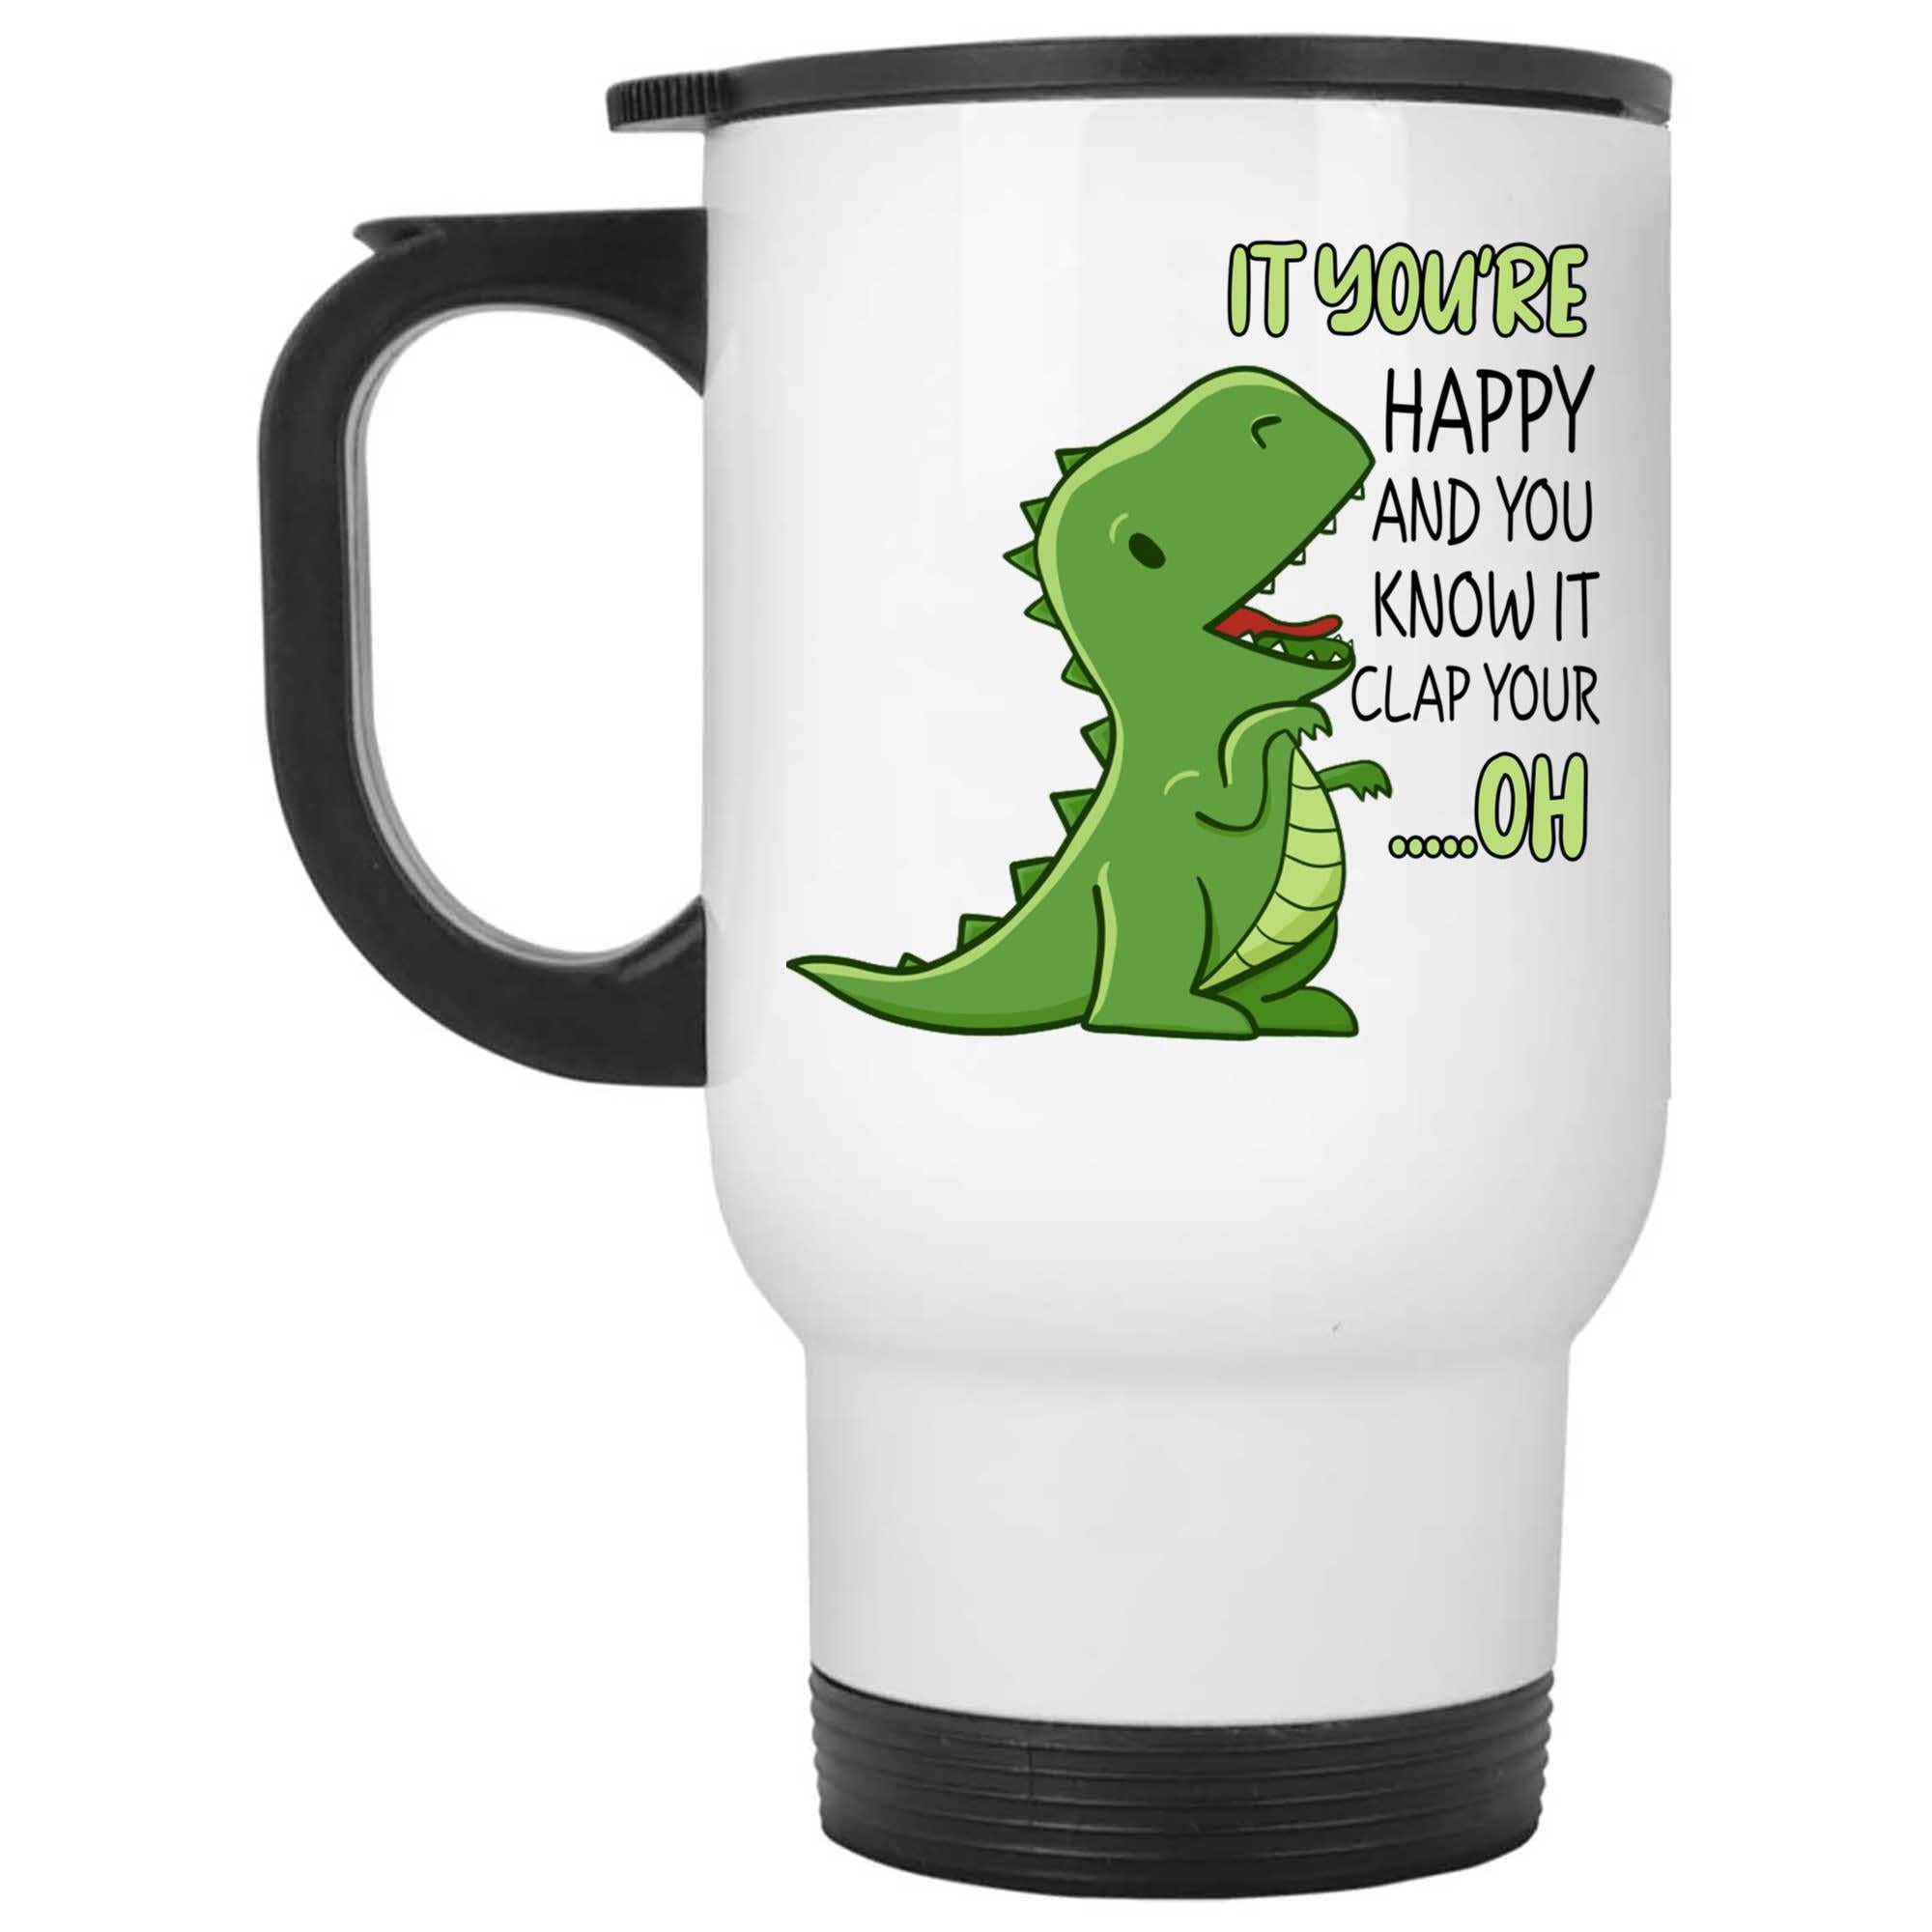 Skitongifts Coffee Mug Funny Ceramic Novelty M23-Kl231221-It You're Happy And You Know It Clap Your Oh Yvc66Or